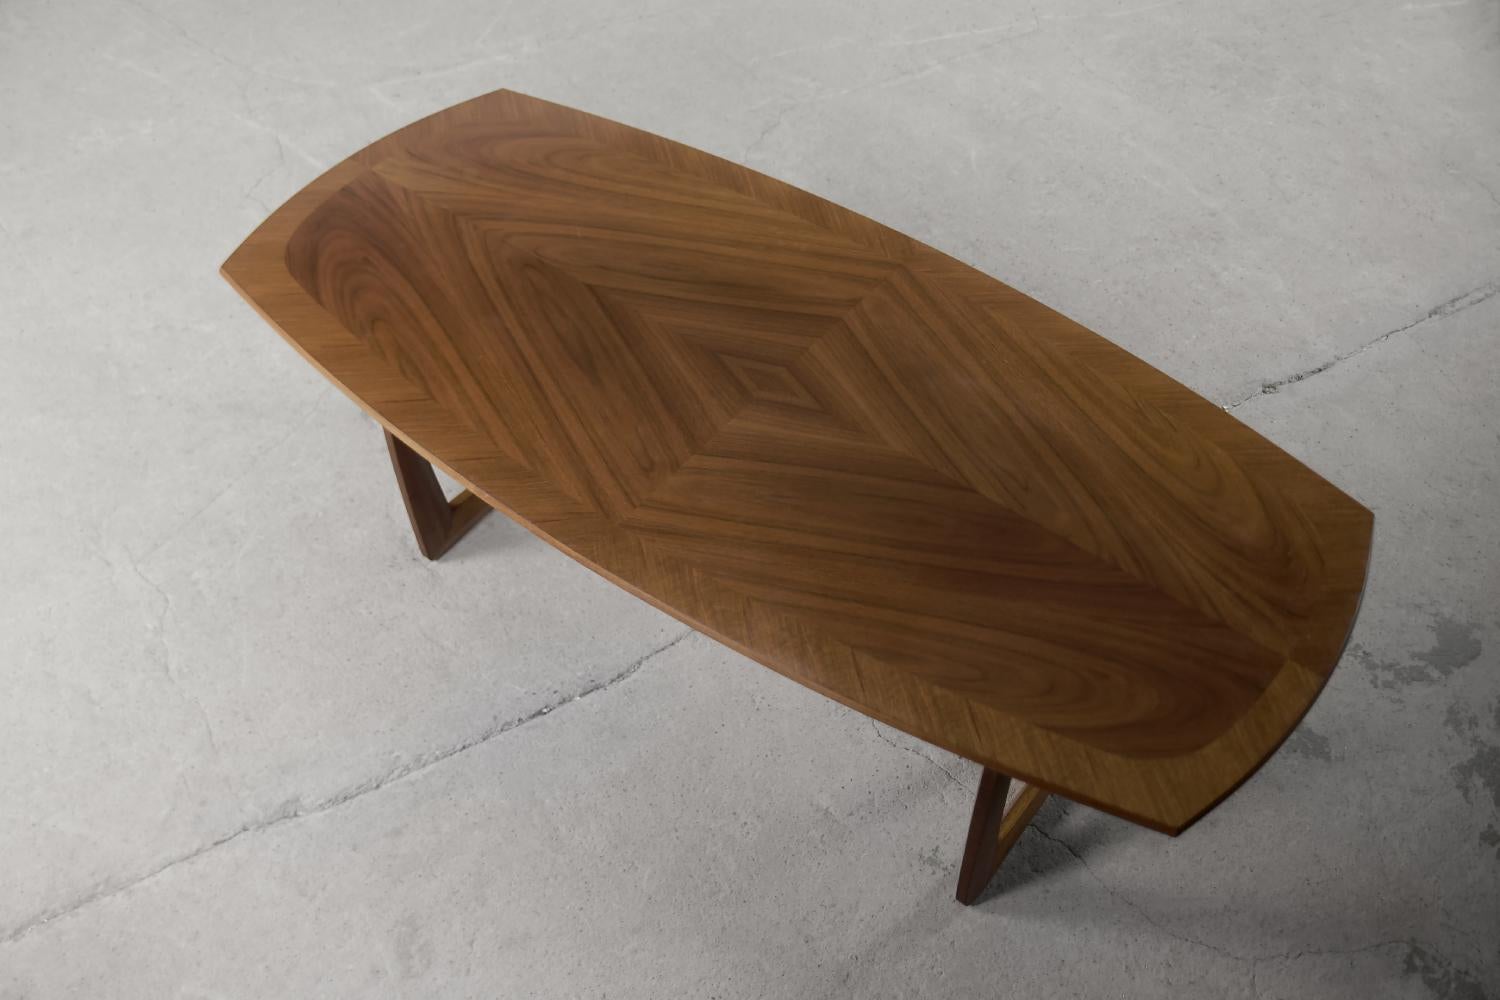 This elliptical table was manufactured by the German company Kondor Möbel during the 1960s. It was made of walnut wood in a warm shade of brown. An additional advantage is the crossed table legs and a decorative top veneered with walnut. The